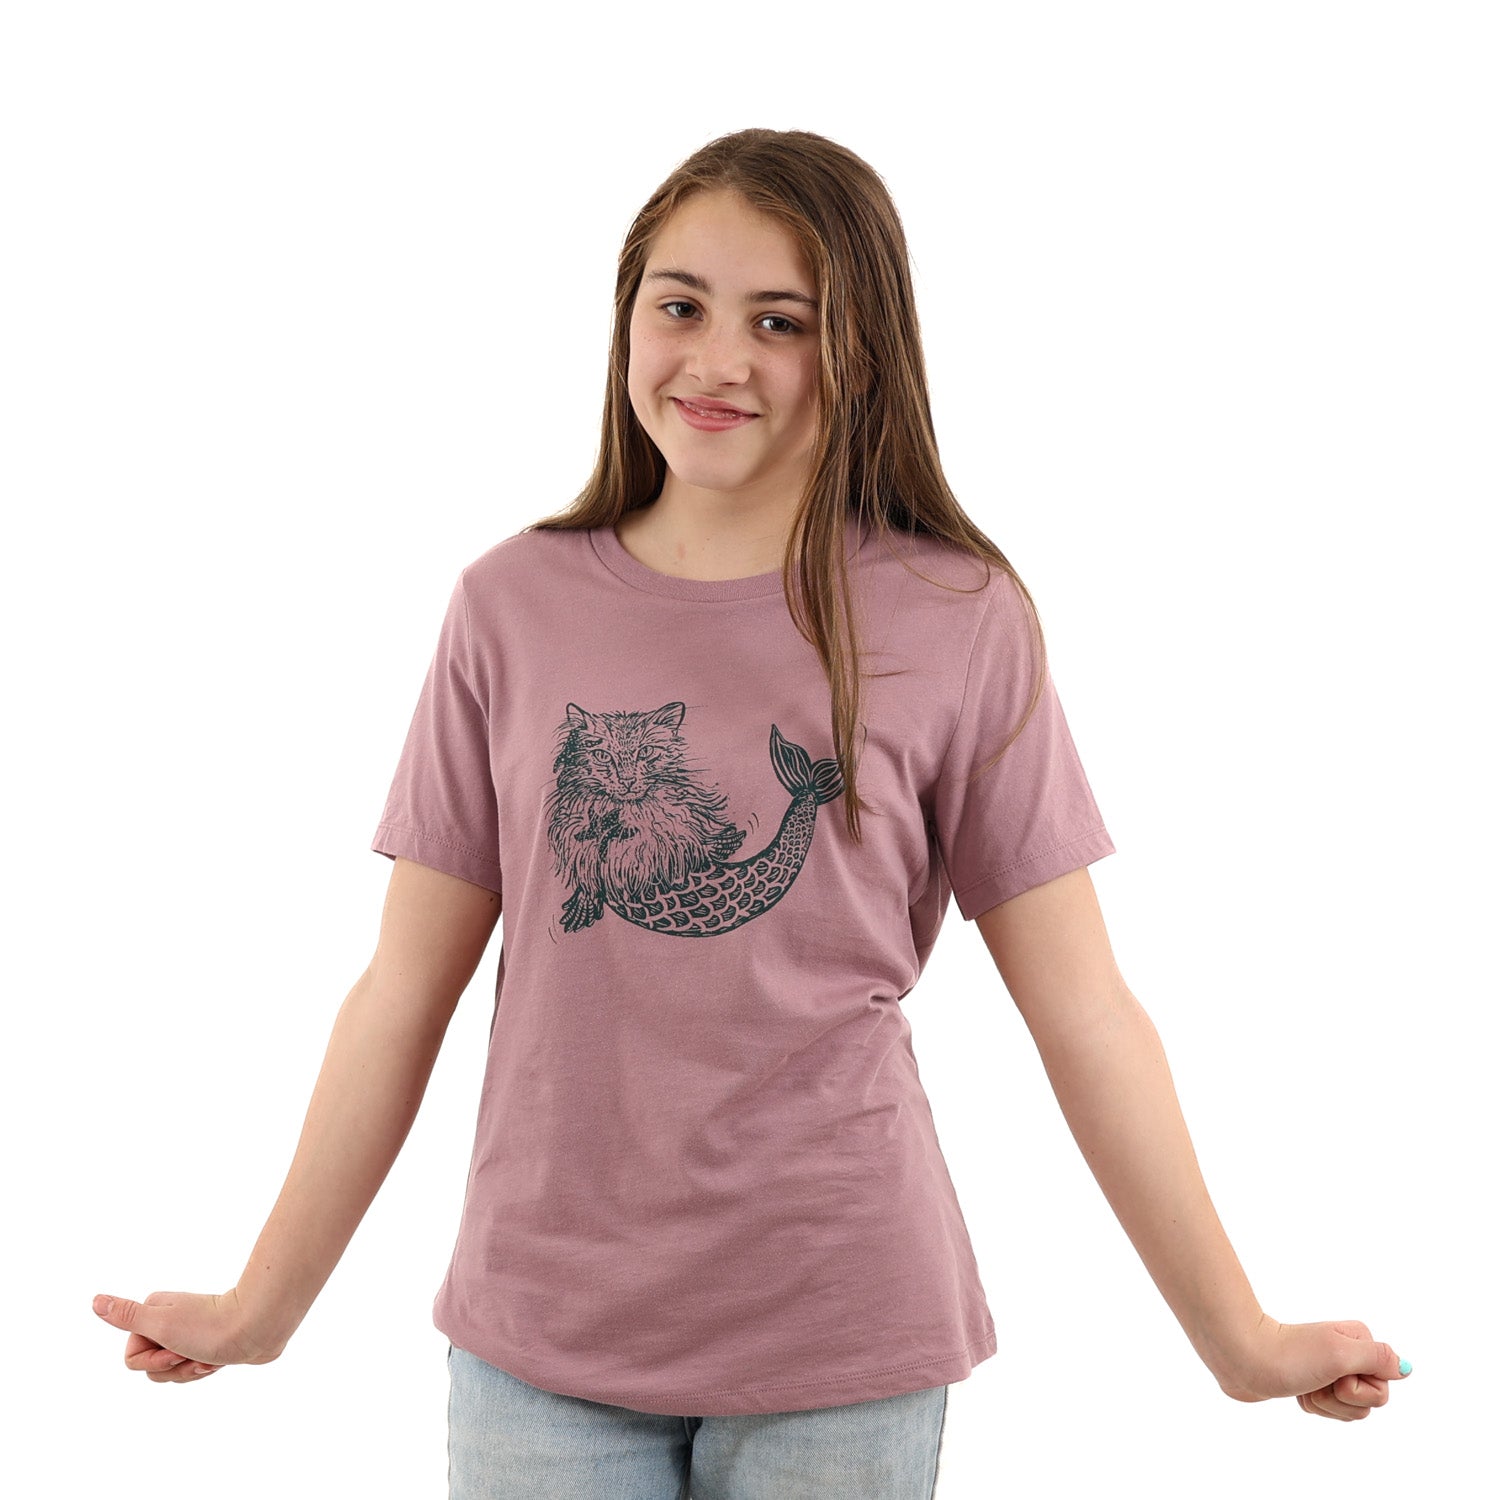 Girl wearing pink shirt with mermaid kitty printed on green ink